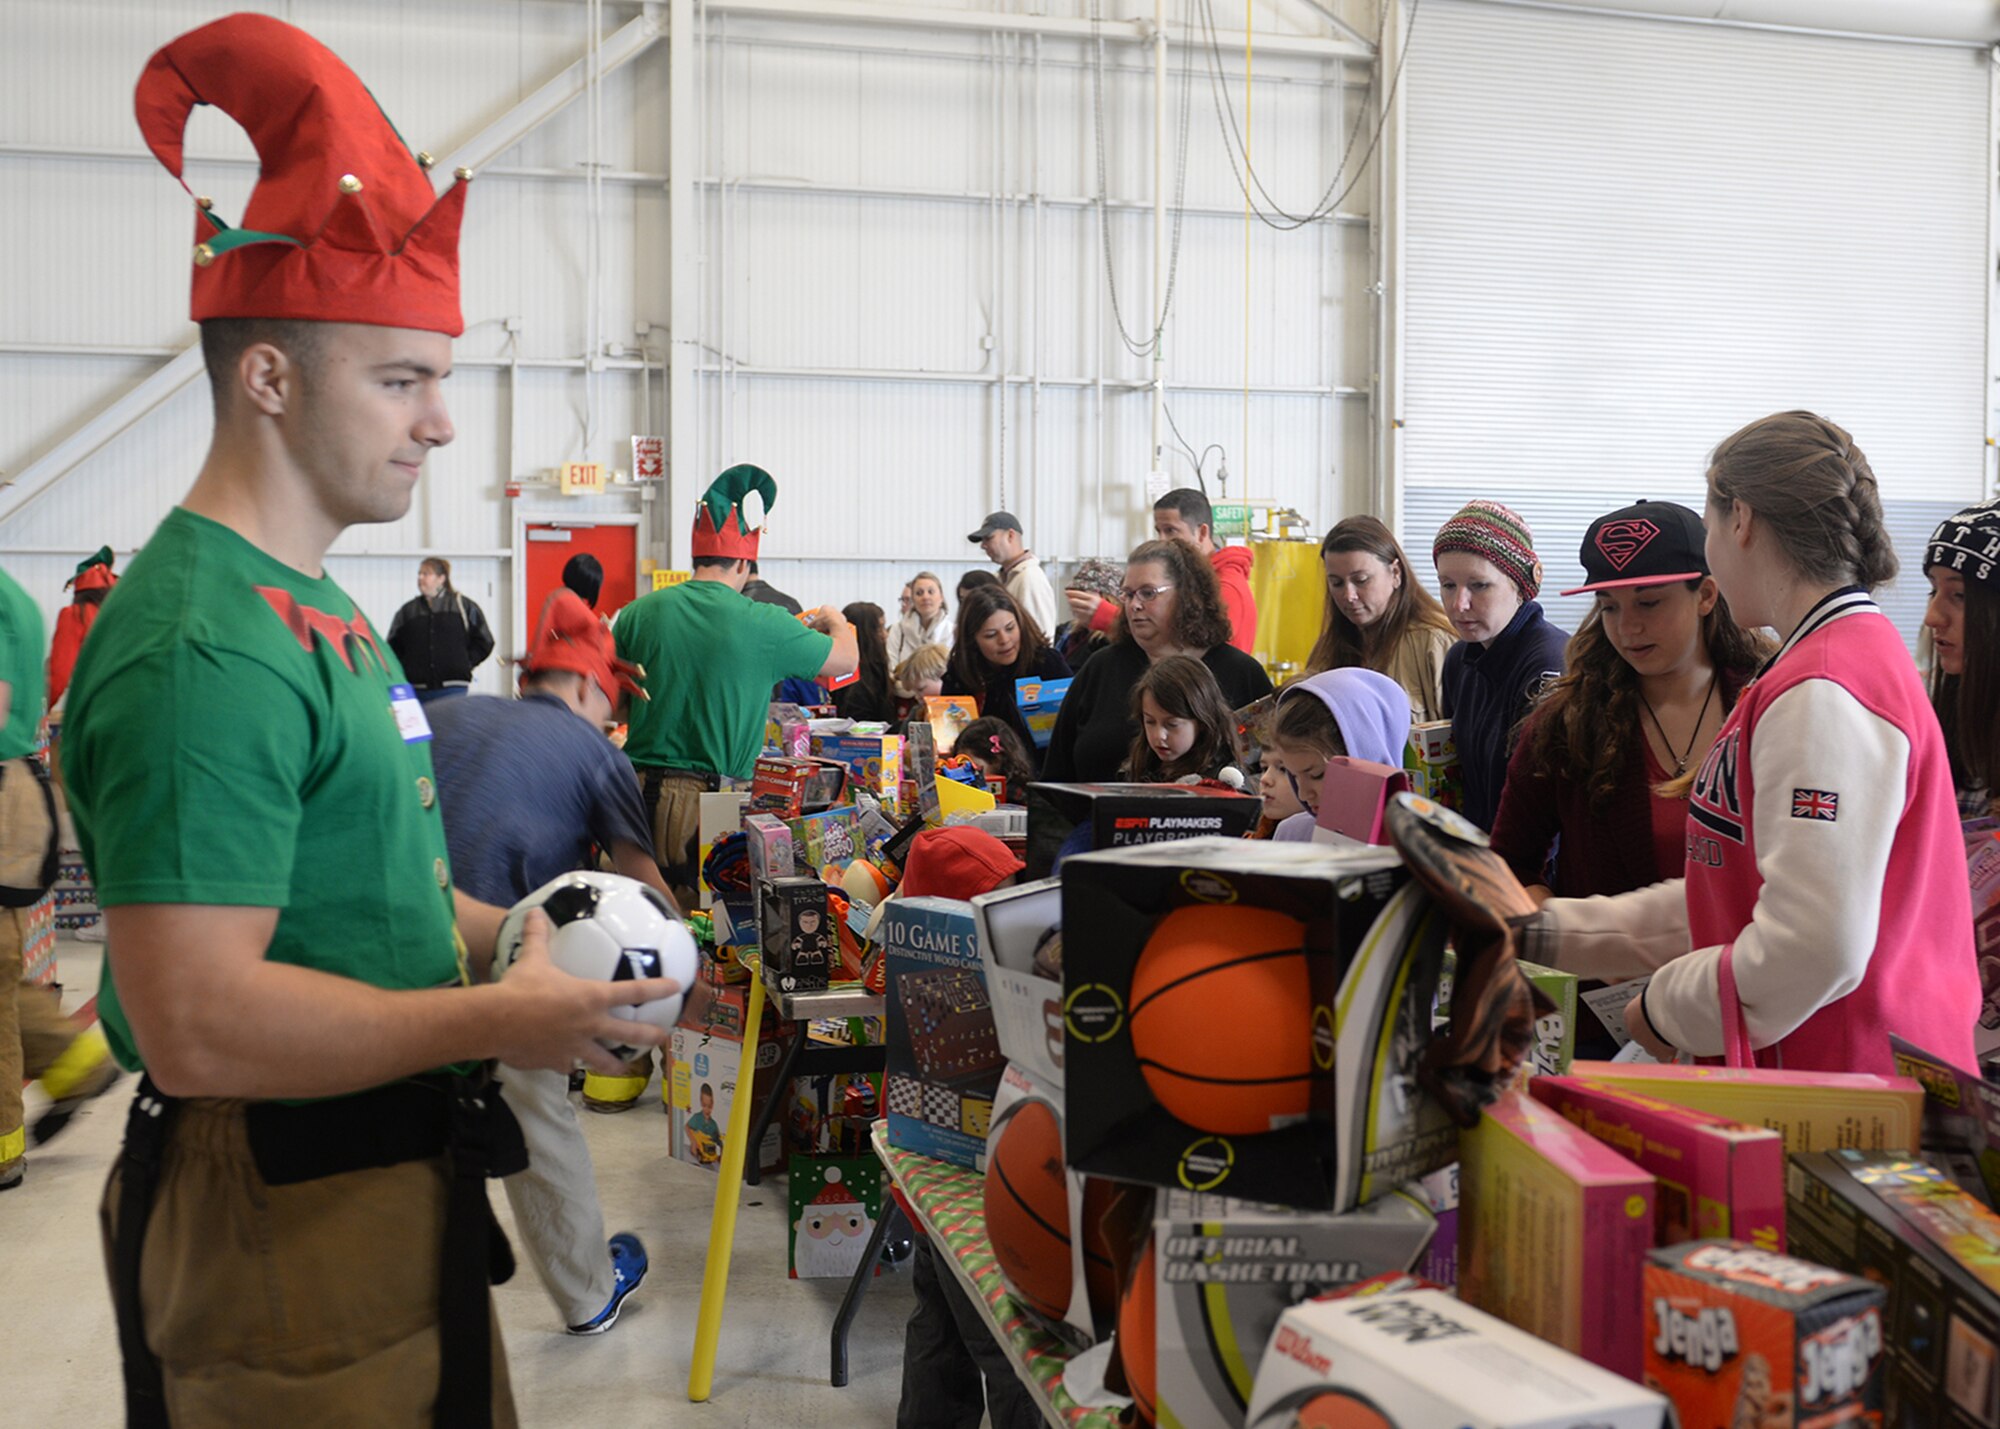 Members of Team Beale receive gifts during the annual Children's Holiday Party Dec. 12, 2015, at Beale Air Force Base, California. Thousands of presents were donated by multiple suppliers and were handed out to the children of Team Beale. In addition, the event included photos with Santa Clause and his elves, a raffle and various holiday activities. (U.S. Air Force photo by Airman 1st Class Ramon A. Adelan)